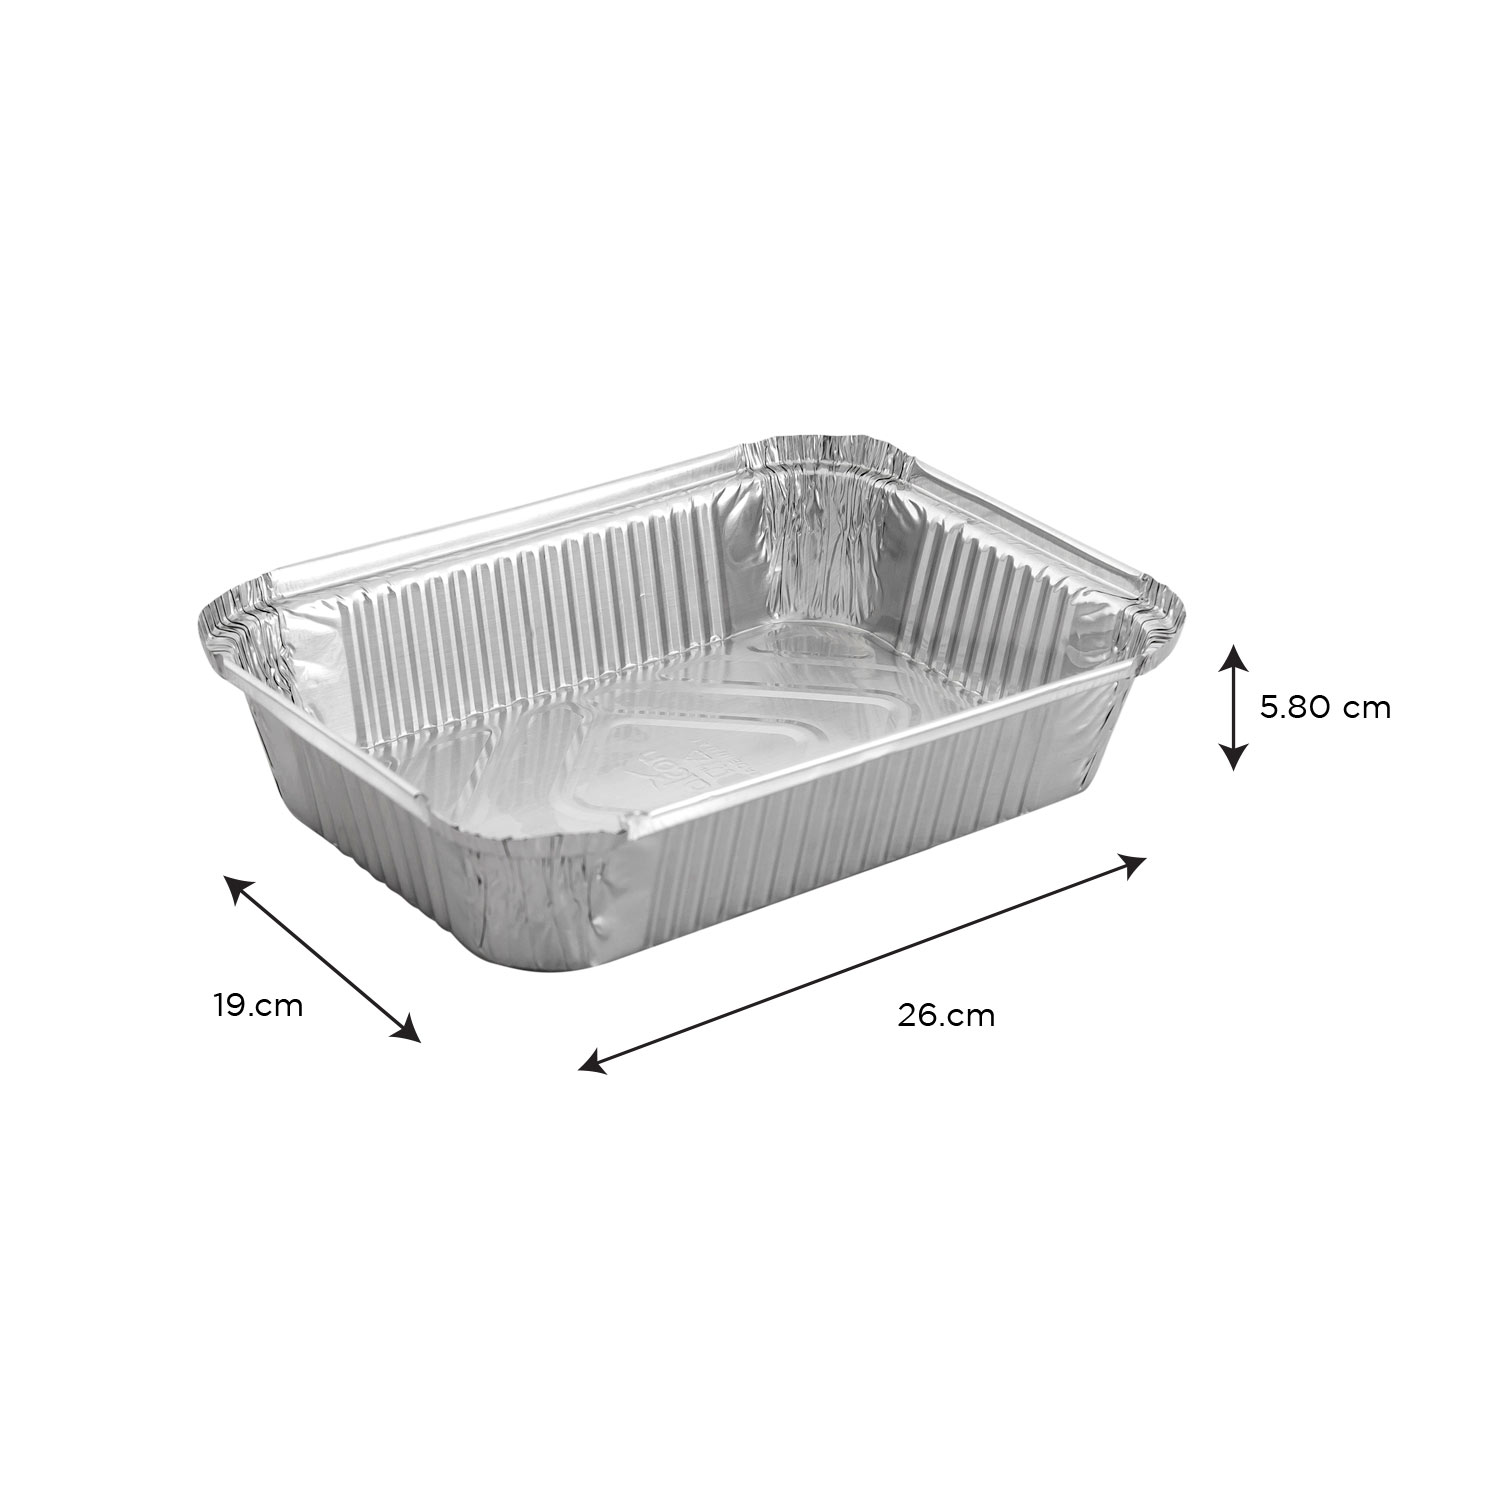 4 lb Oblong Take-Out Foil Container